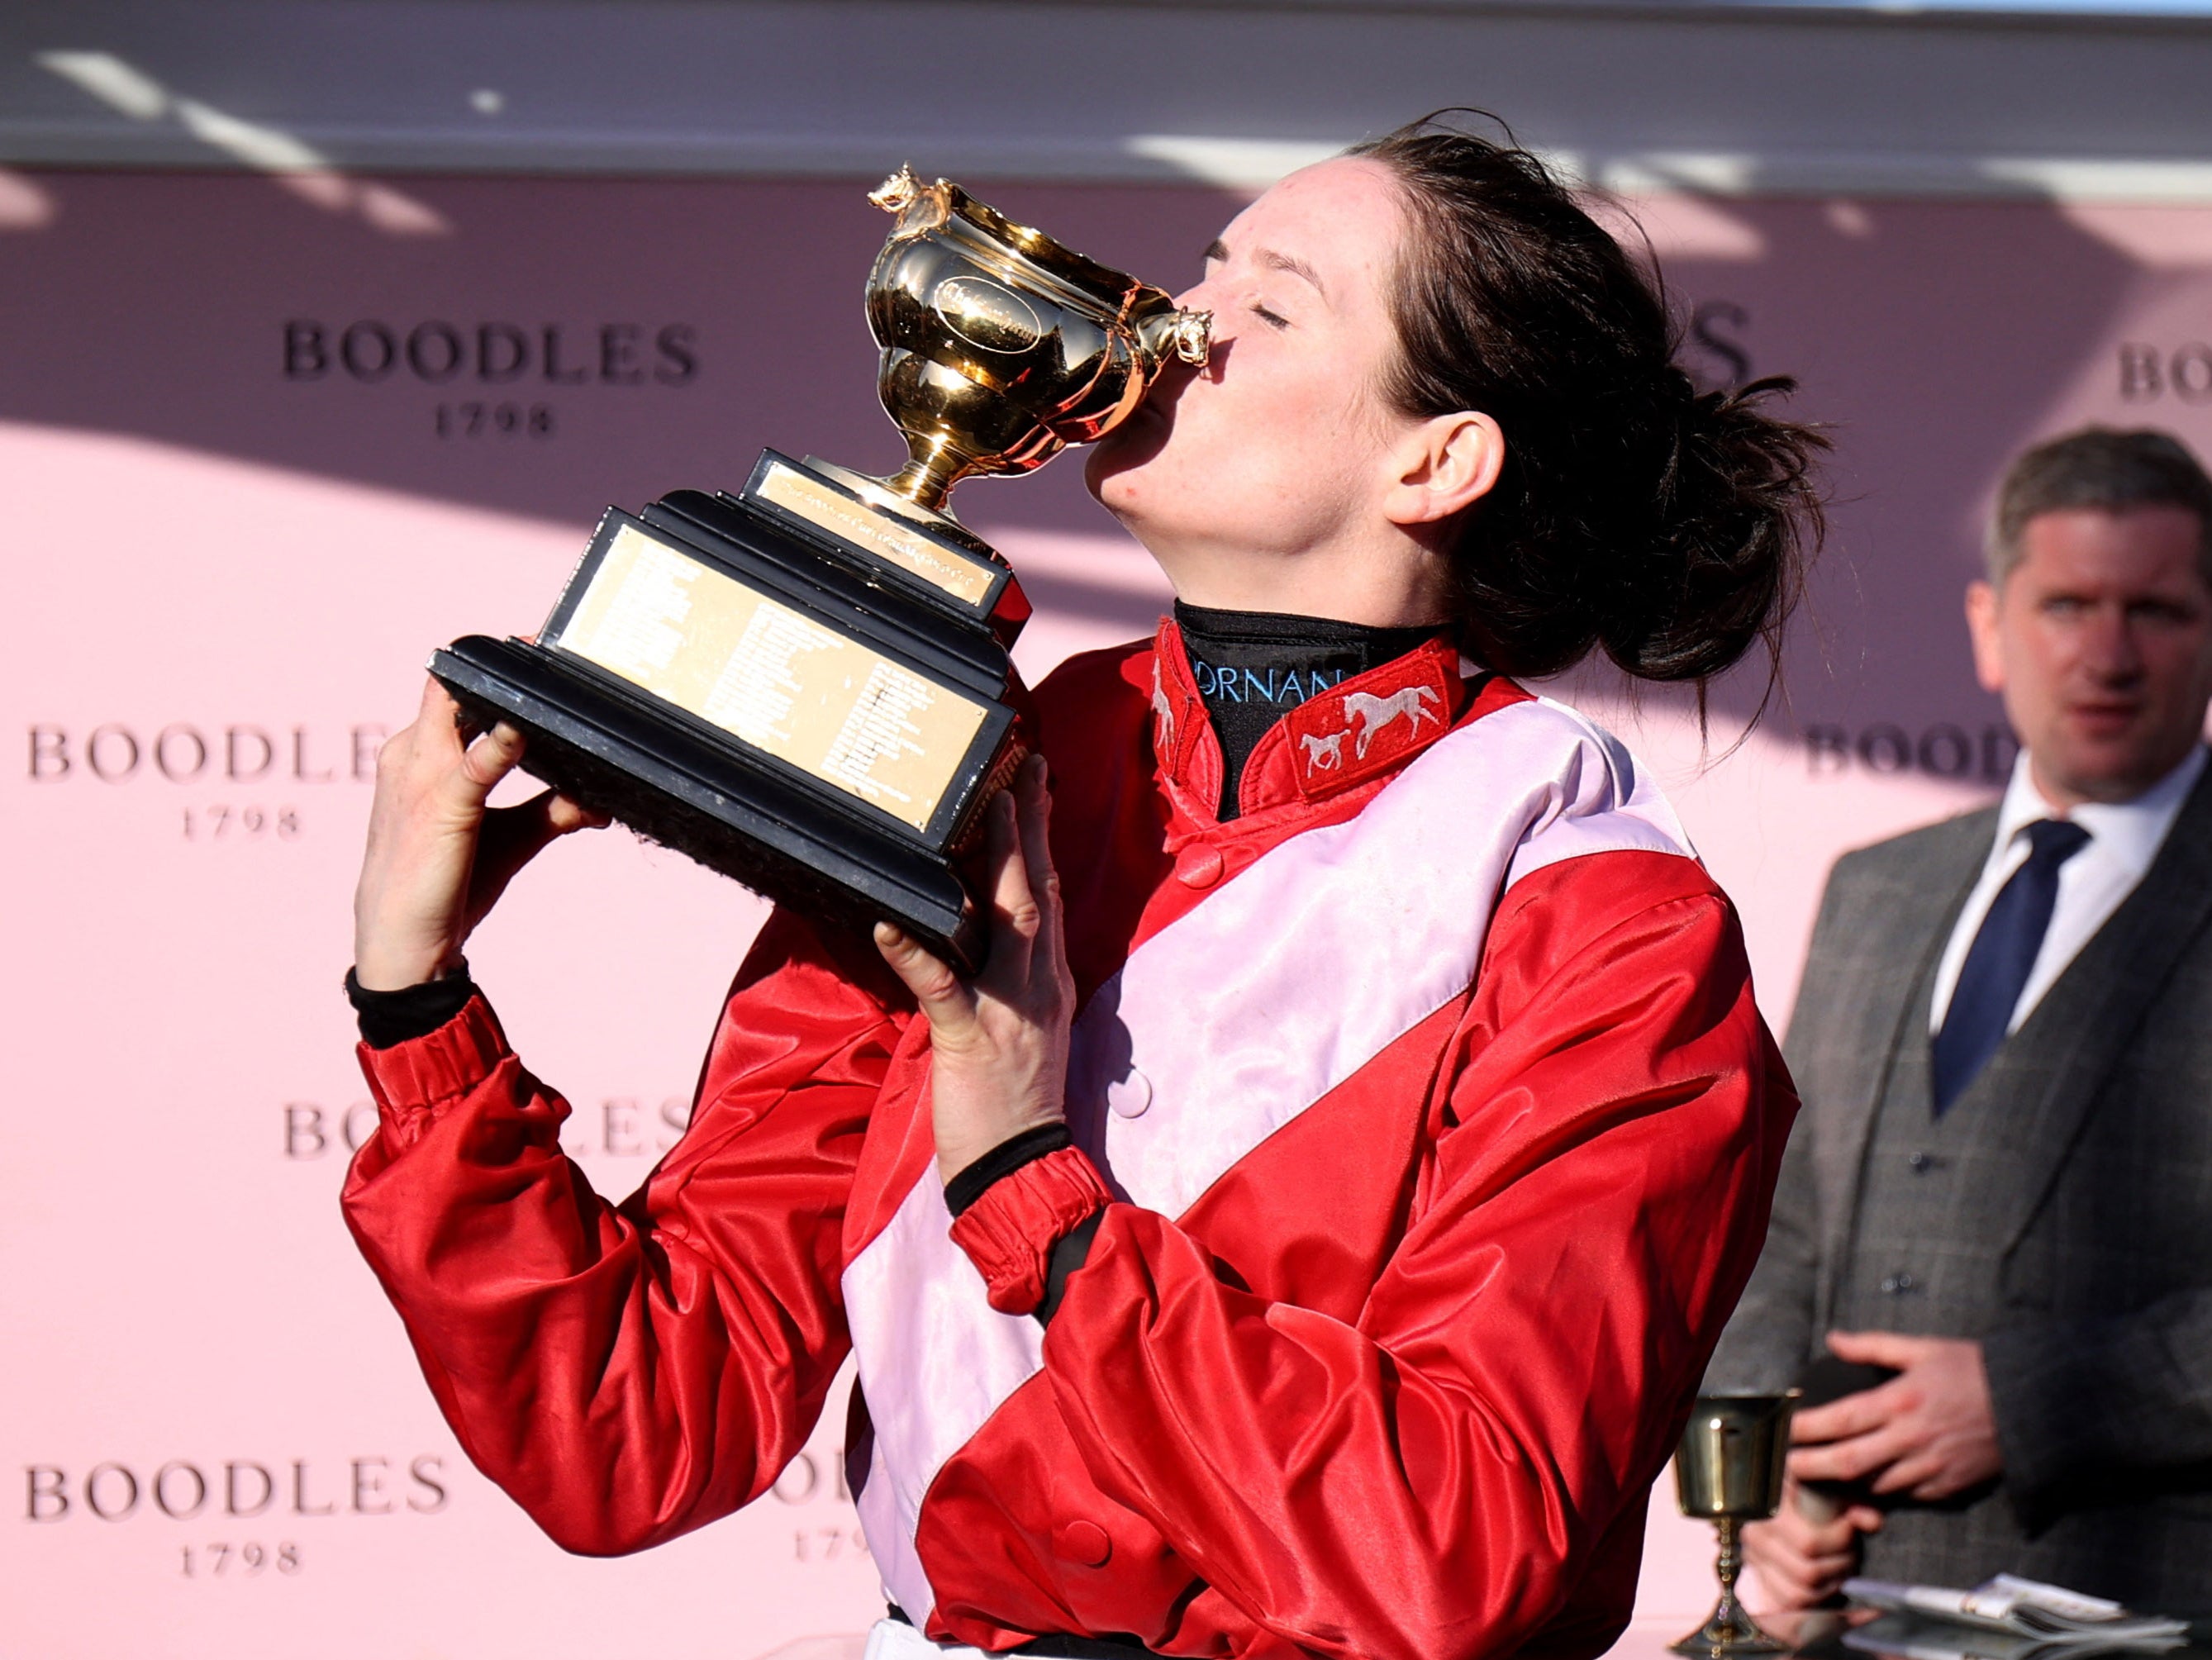 Blackmore becomes the first woman to ride a Gold Cup winner